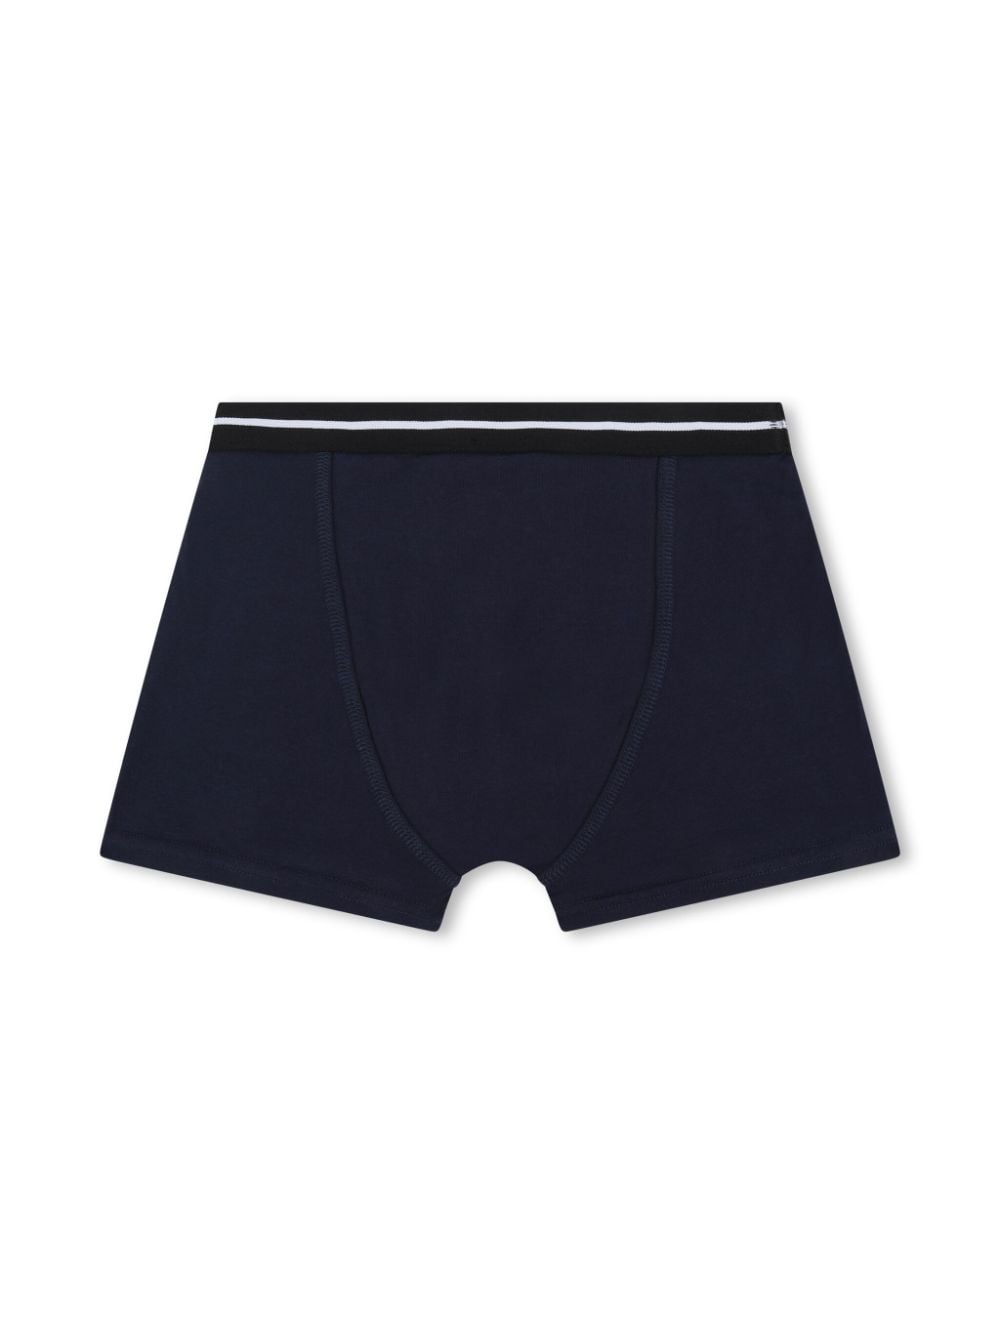 Image 2 of BOSS Kidswear logo-waistband boxers (pack of two)